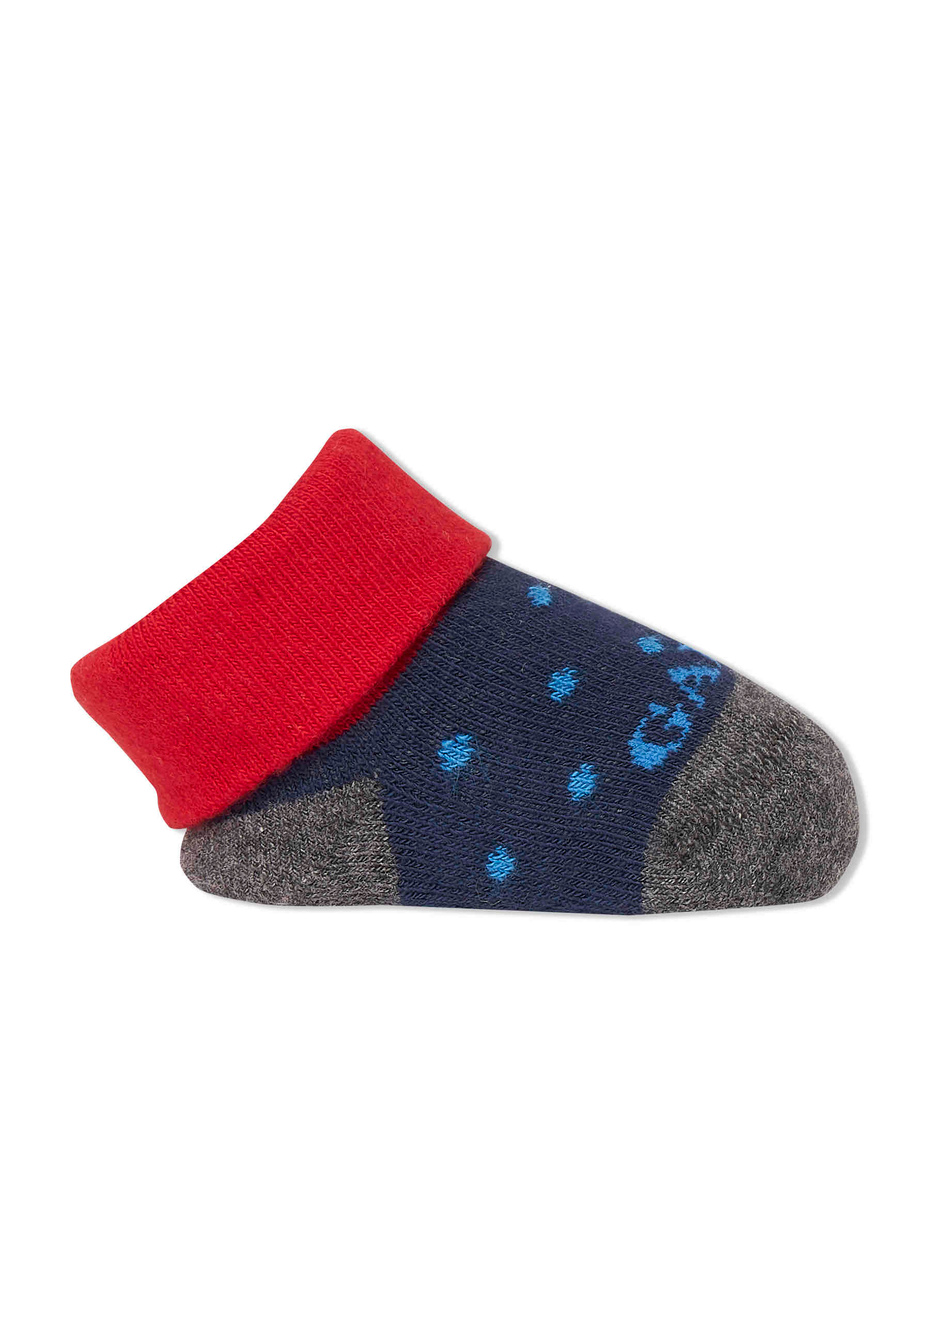 Kids' royal cotton booties with polka dots - Gallo 1927 - Official Online Shop